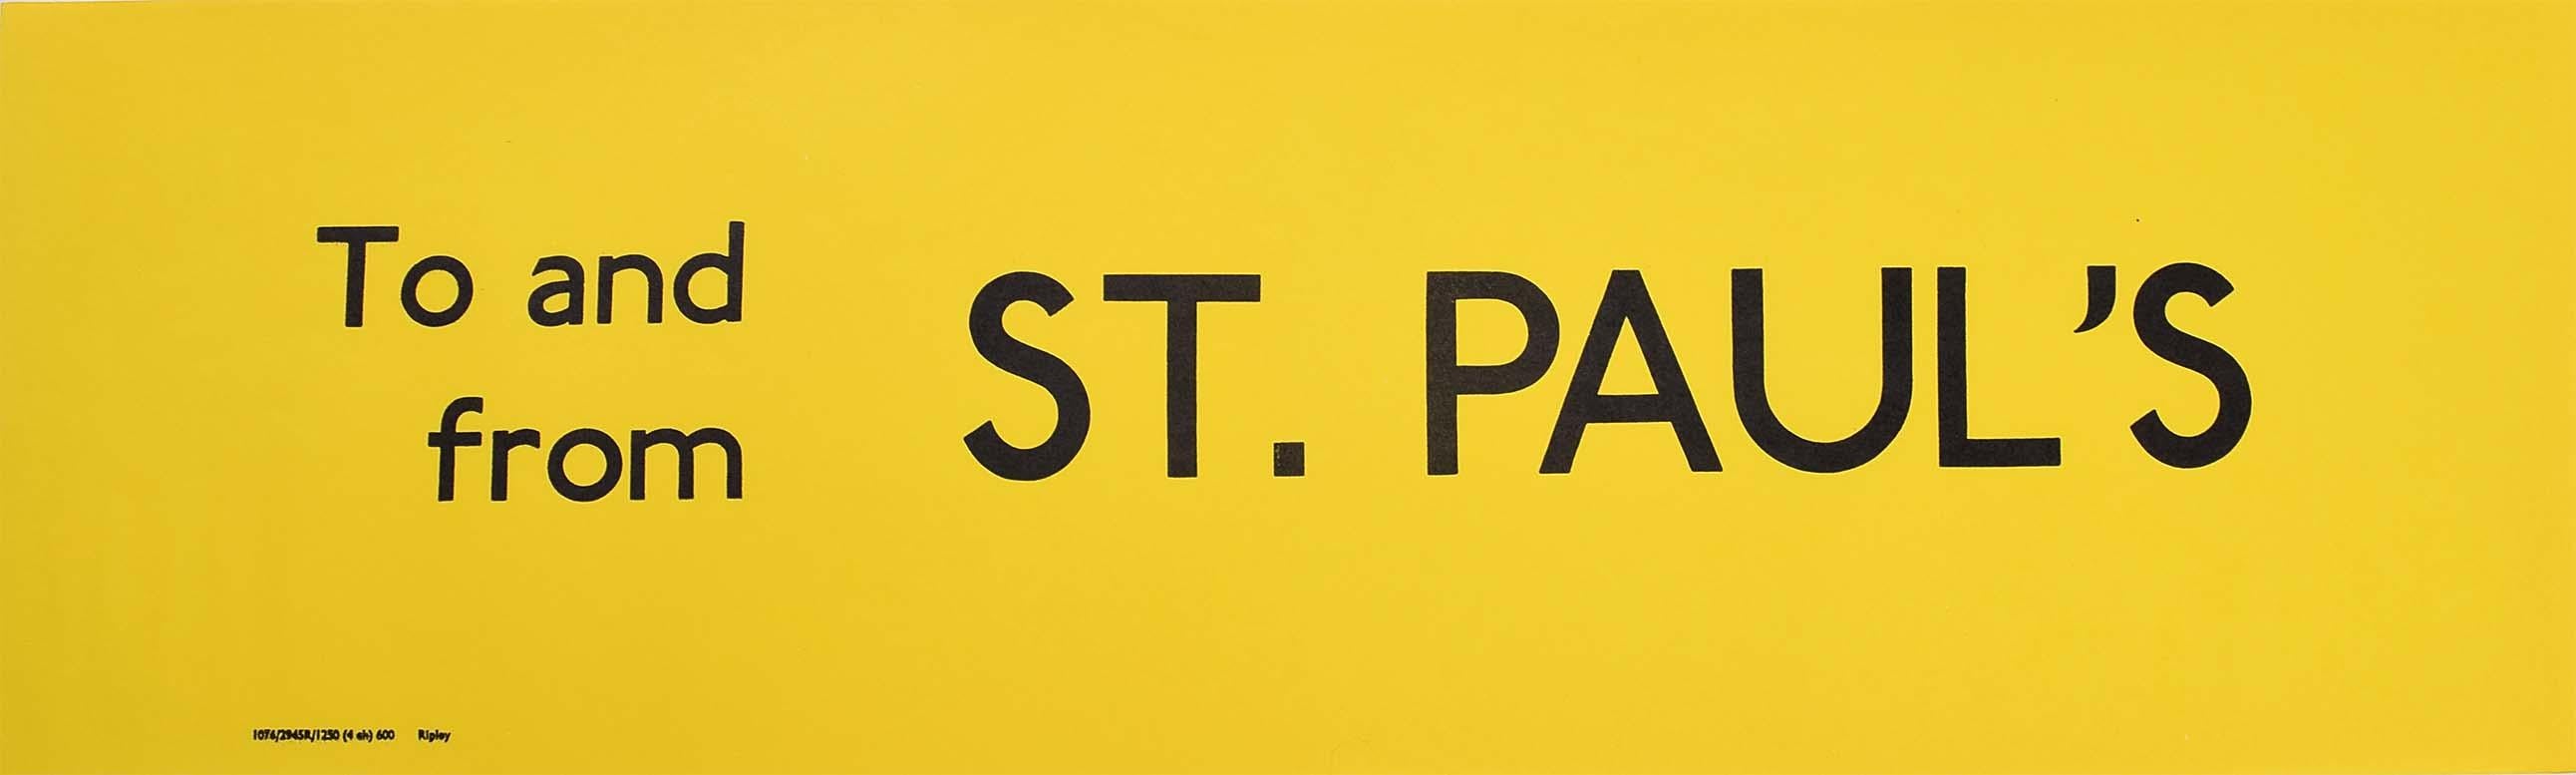 Unknown Print - St. Paul's, London England Routemaster Bus sign c. 1970 transport poster